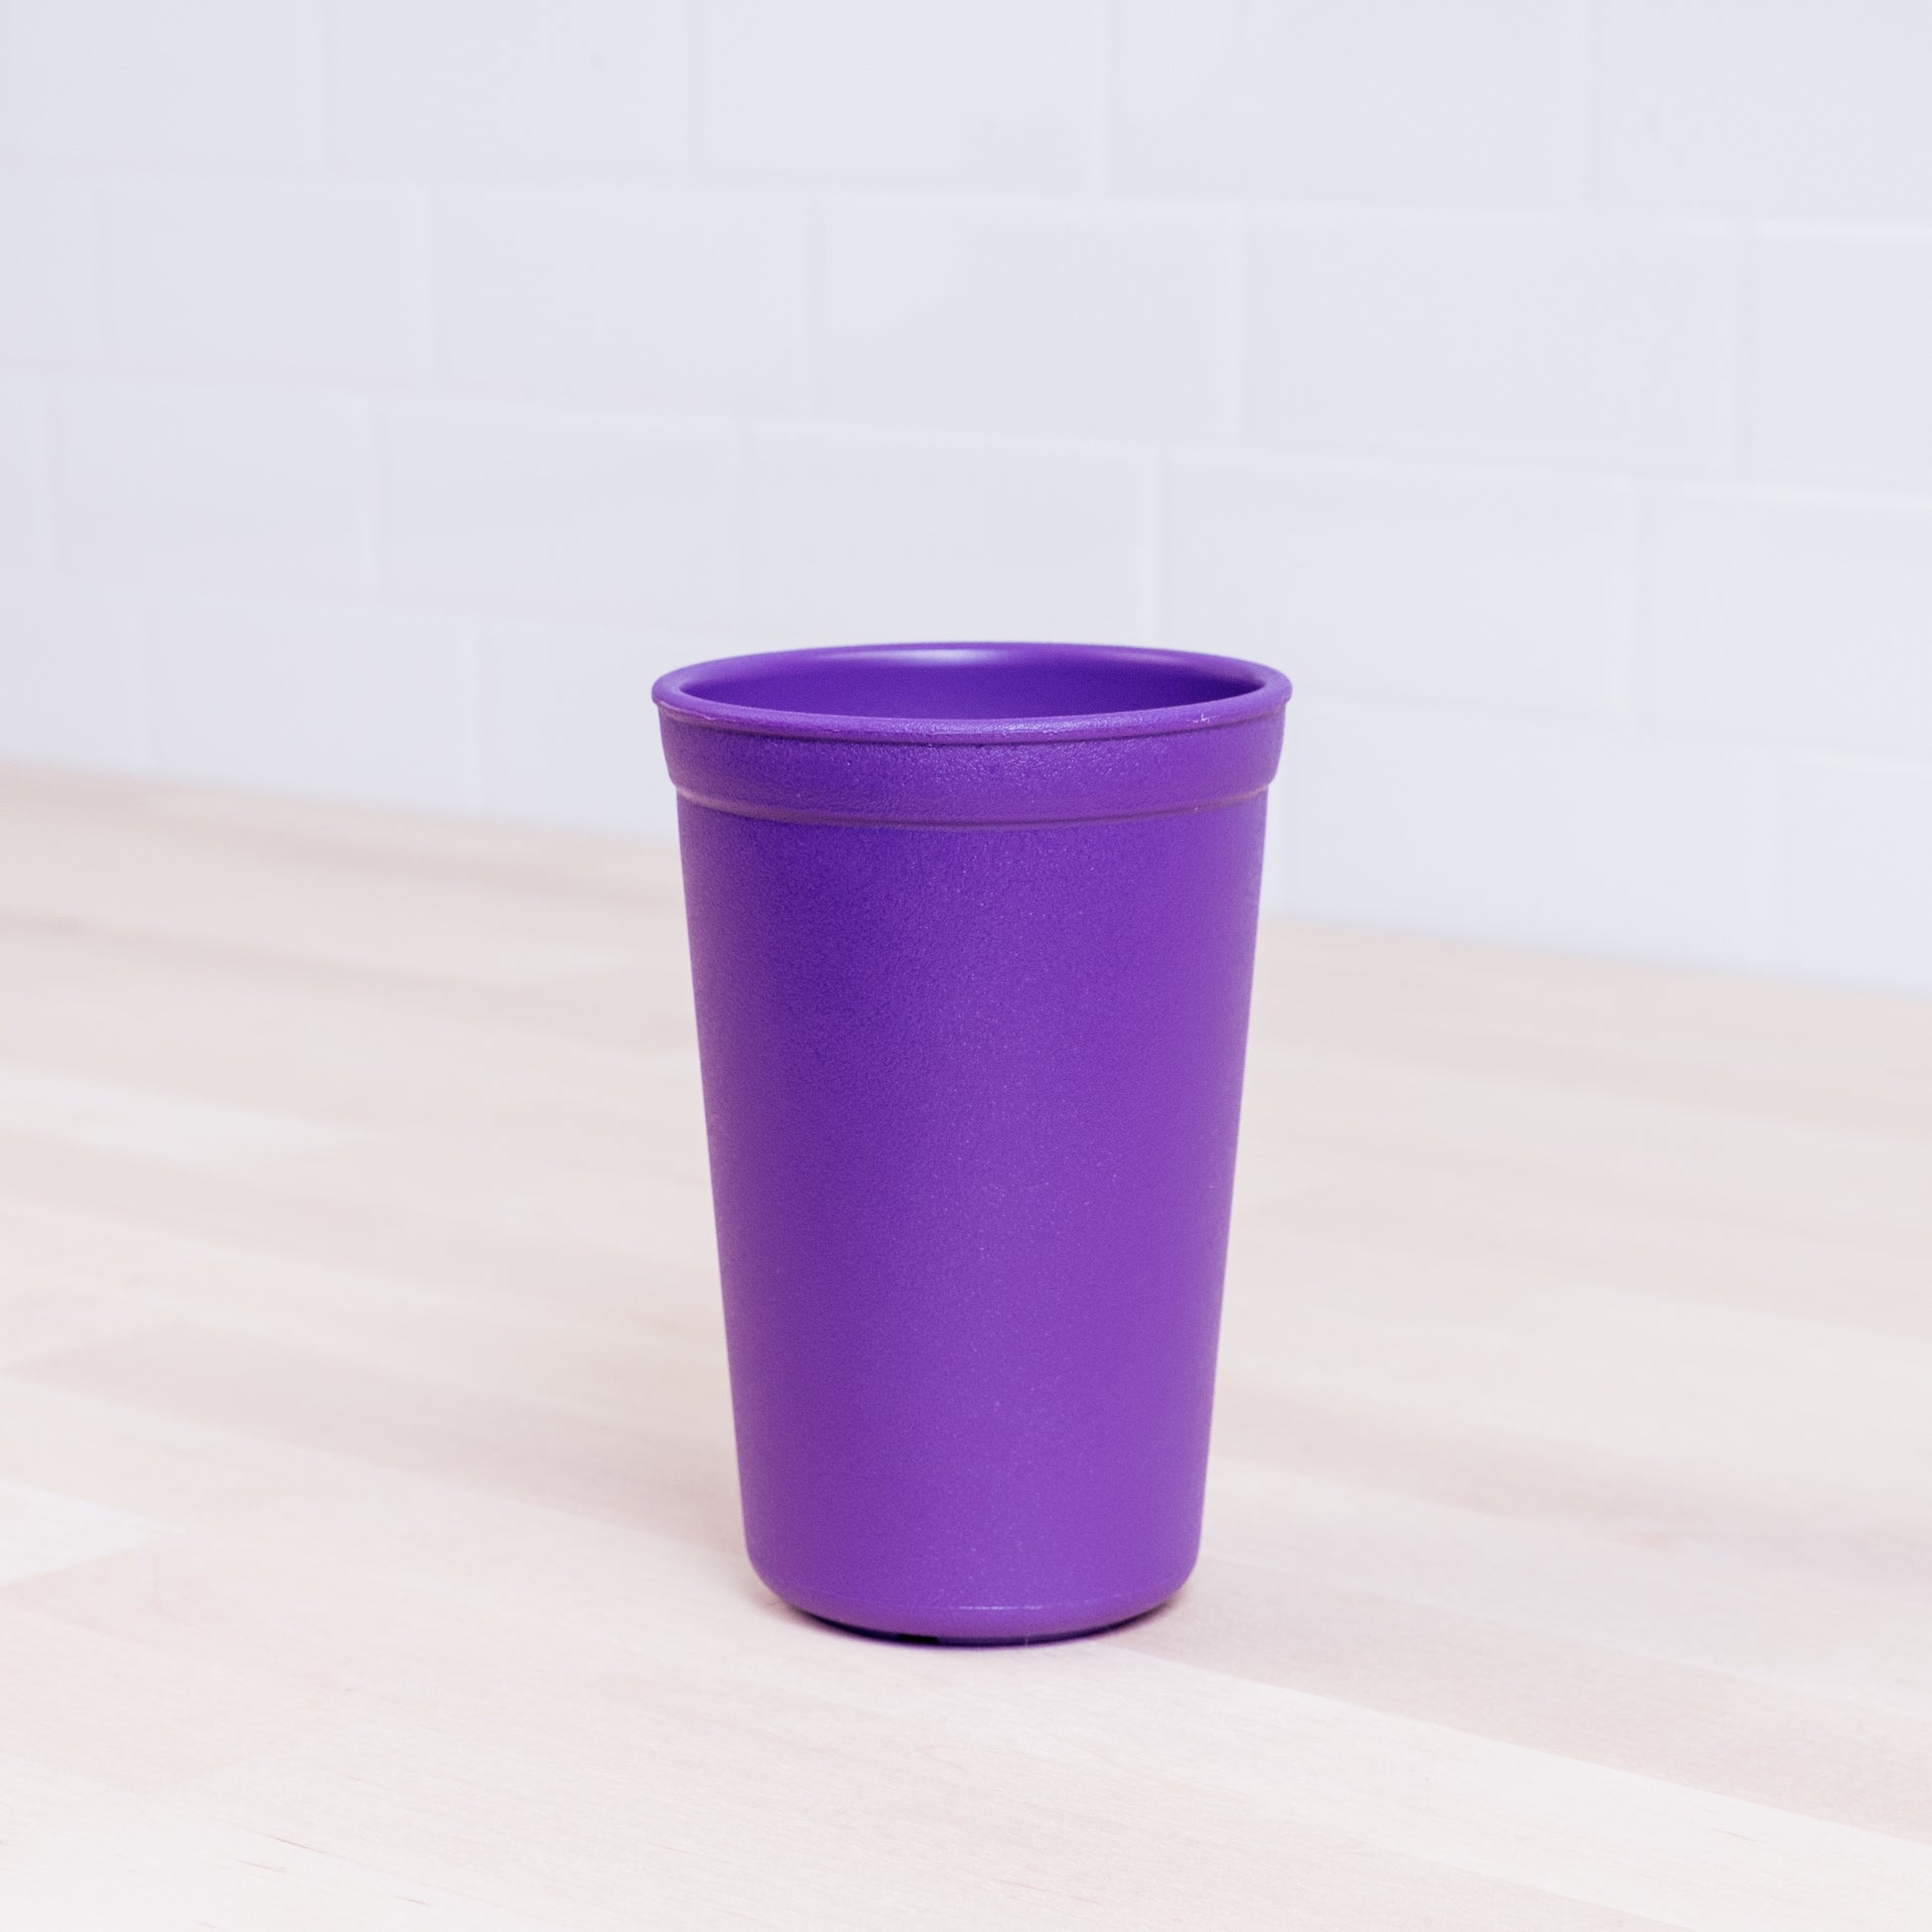 Re-Play Tumbler in Amethyst from Bear & Moo